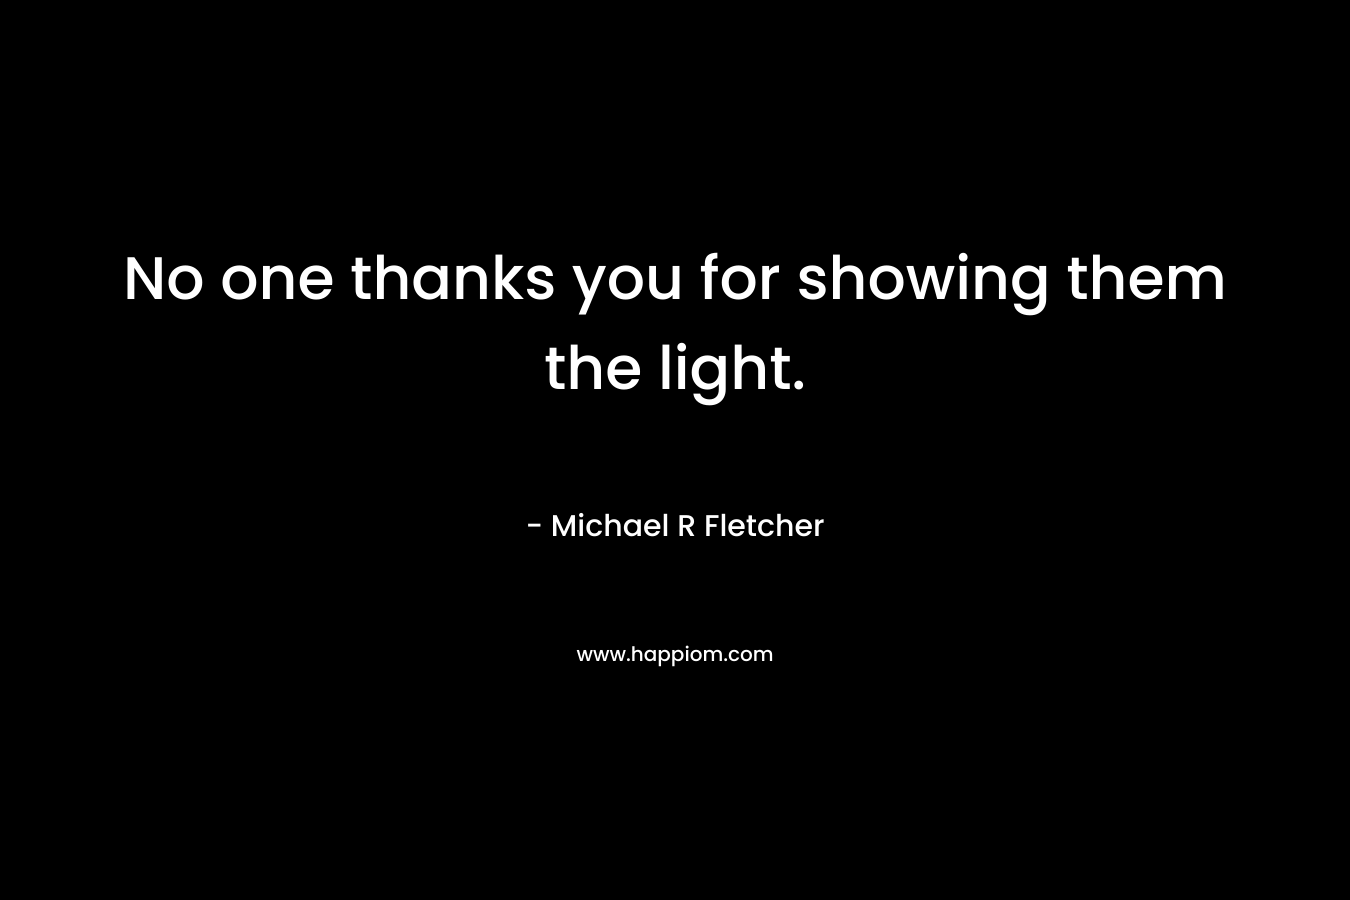 No one thanks you for showing them the light. – Michael R Fletcher